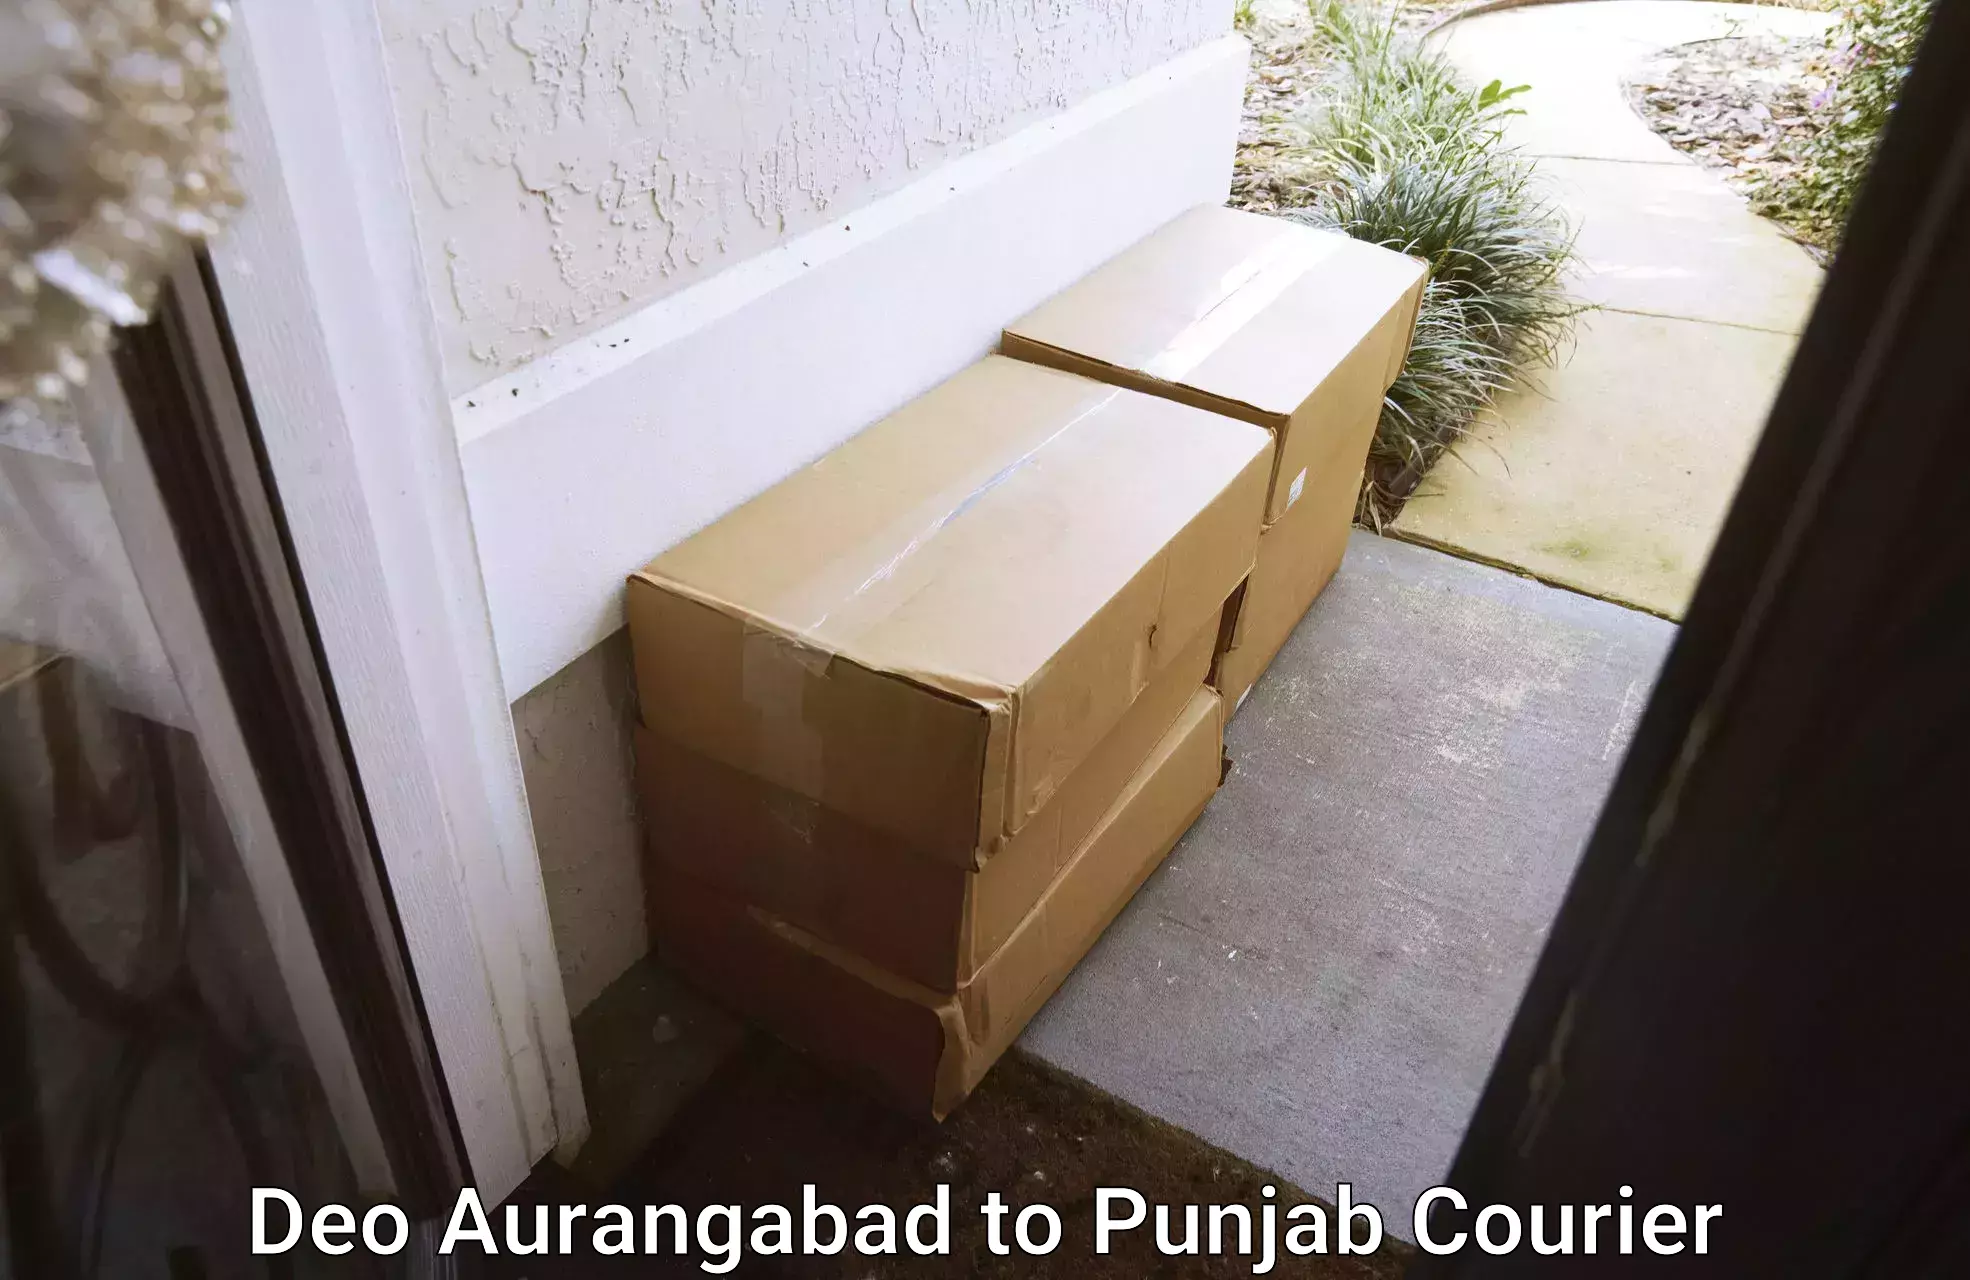 Moving and storage services Deo Aurangabad to Giddarbaha